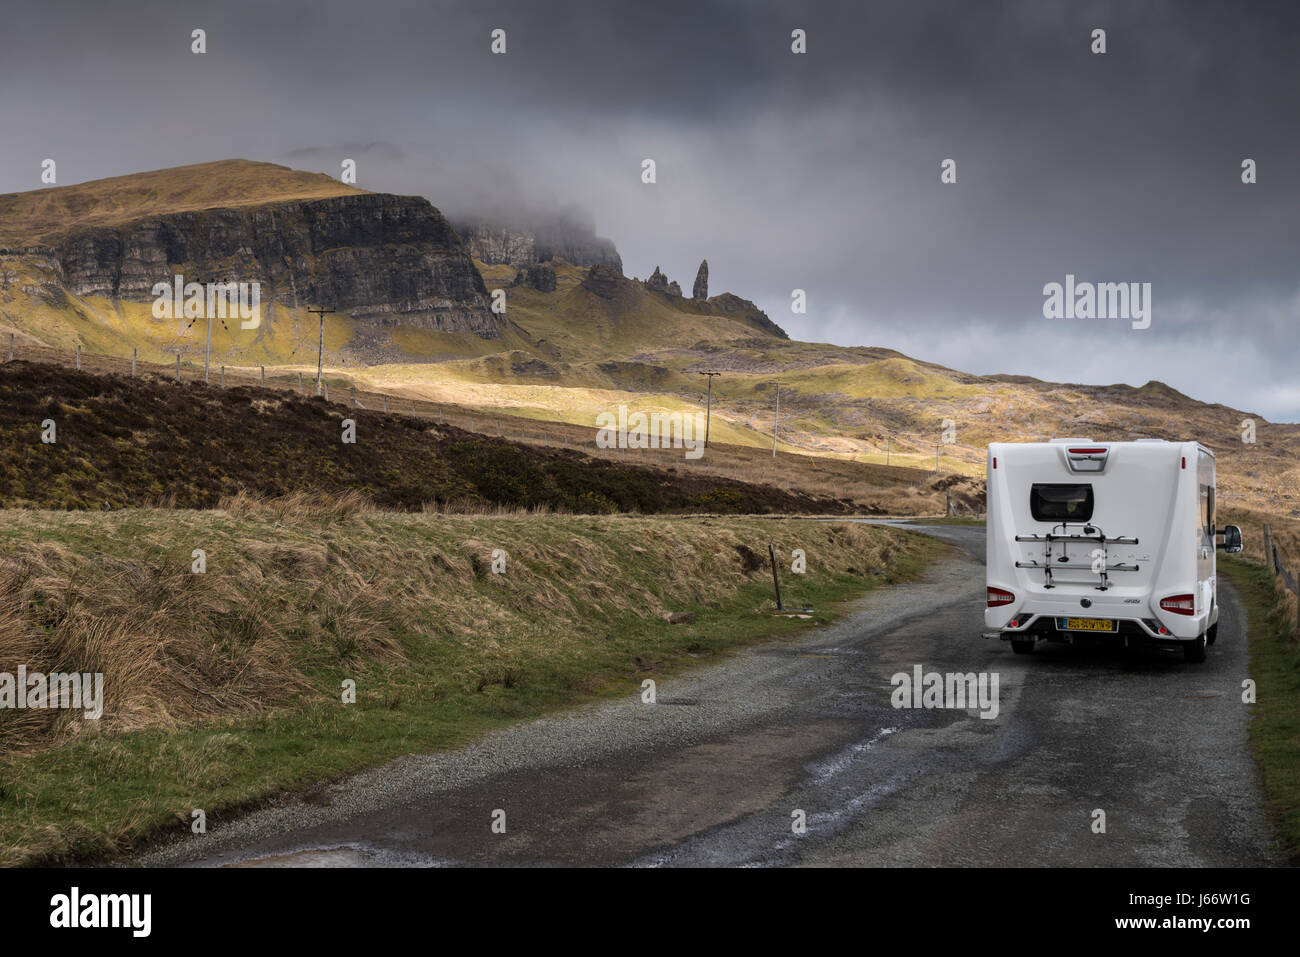 Motorhome parked in layby near to the Old Man of Storr, Trotternish, Isle of Skye, Scotland. Stock Photo